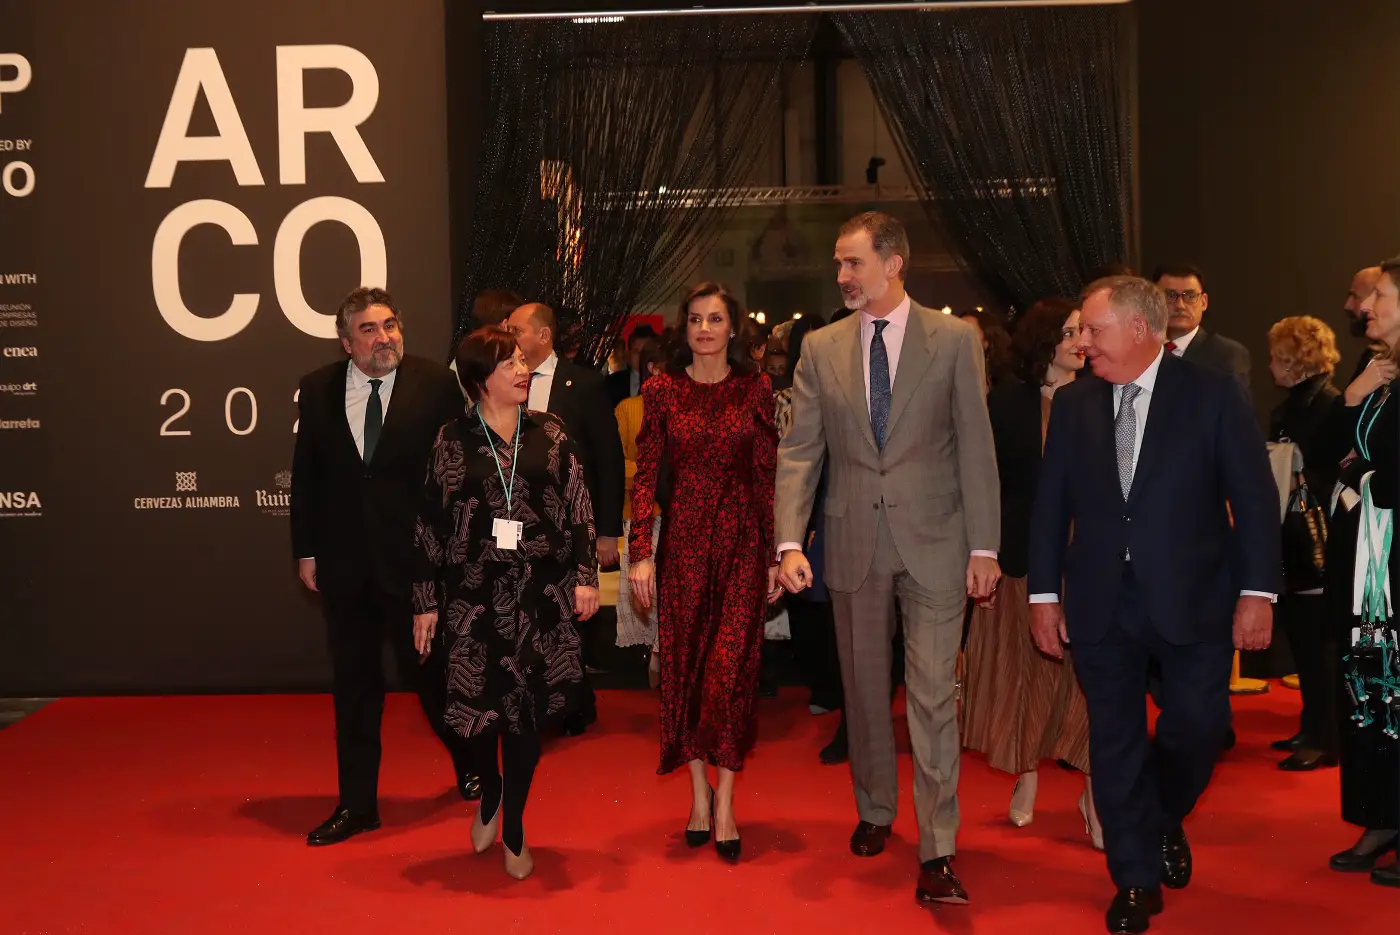 King Felipe and Queen Letizia attended the opening of Art Fair 1